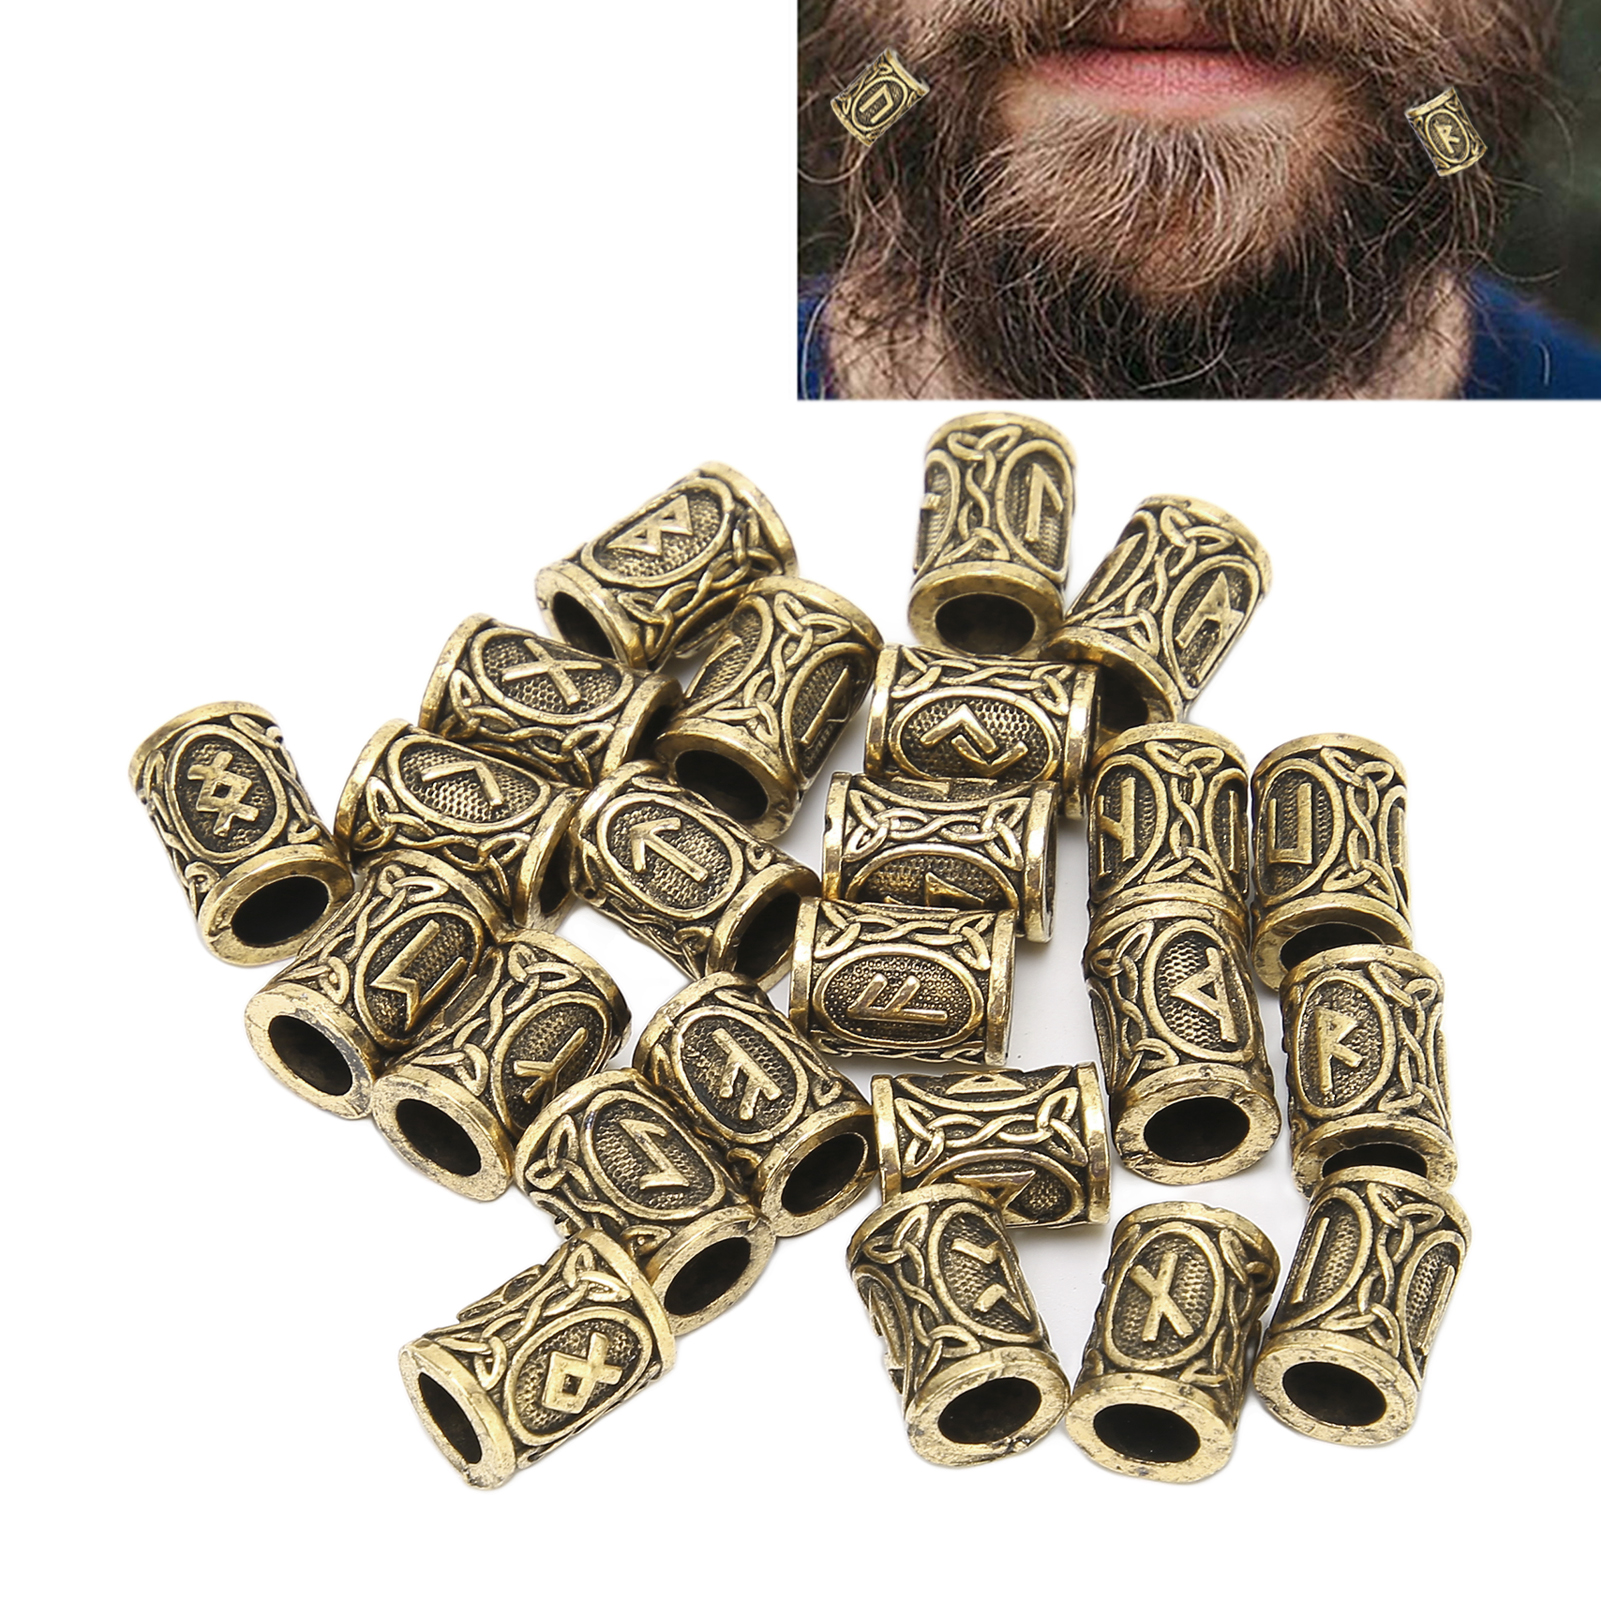 Viking Beard Beads, Small Compact Paracord Beads Zinc Alloy Material 24  Designs For Decoration 